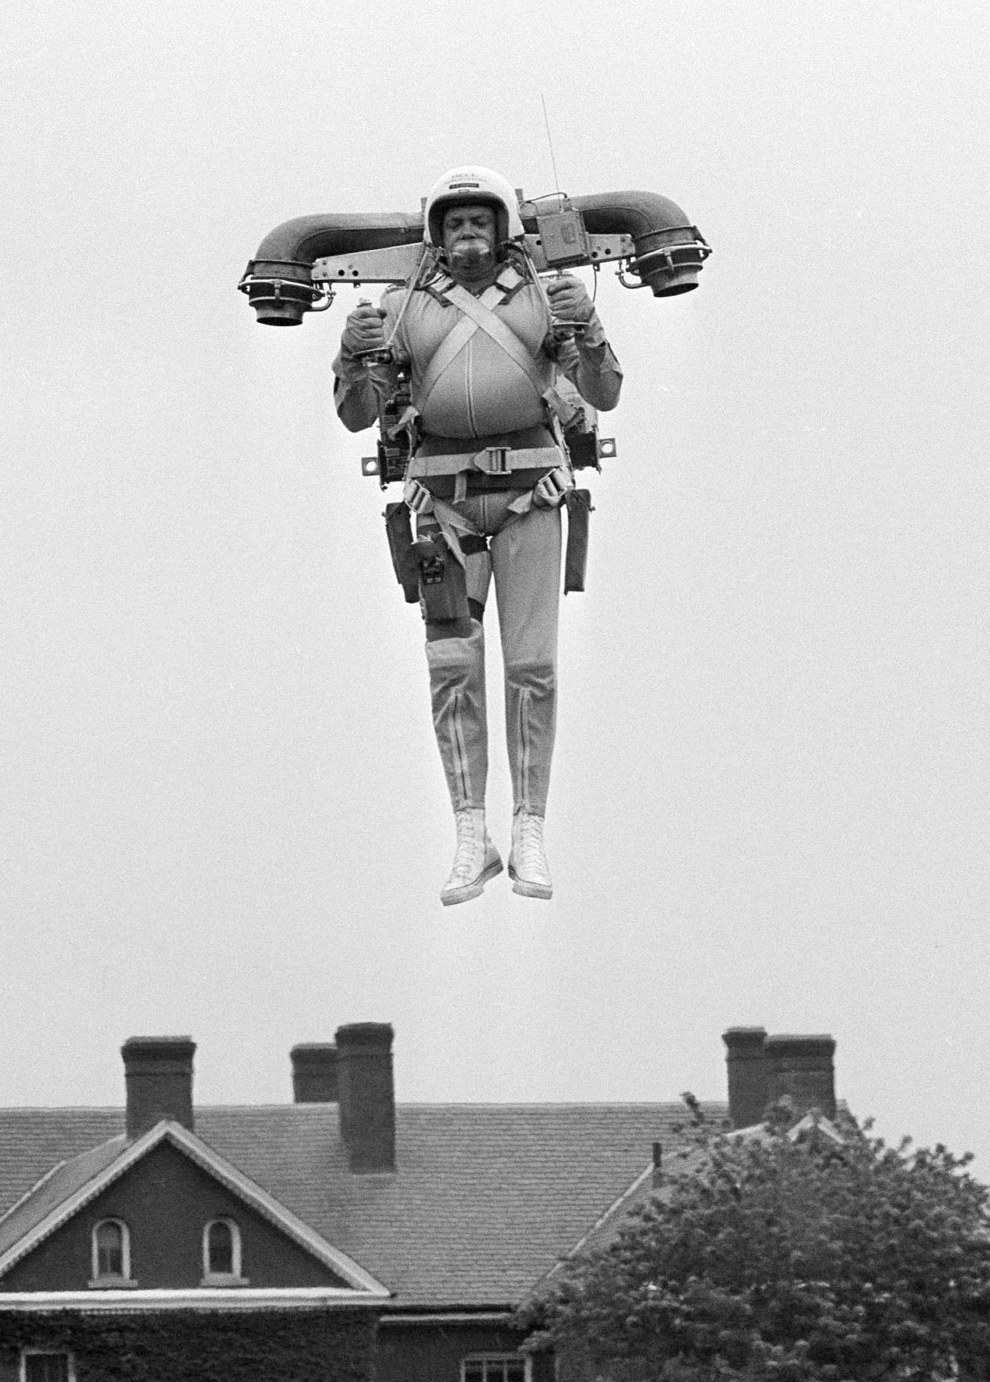 Robert Courter soars to infinity and beyond with this flying jetpack and that sizable gut, 1969.